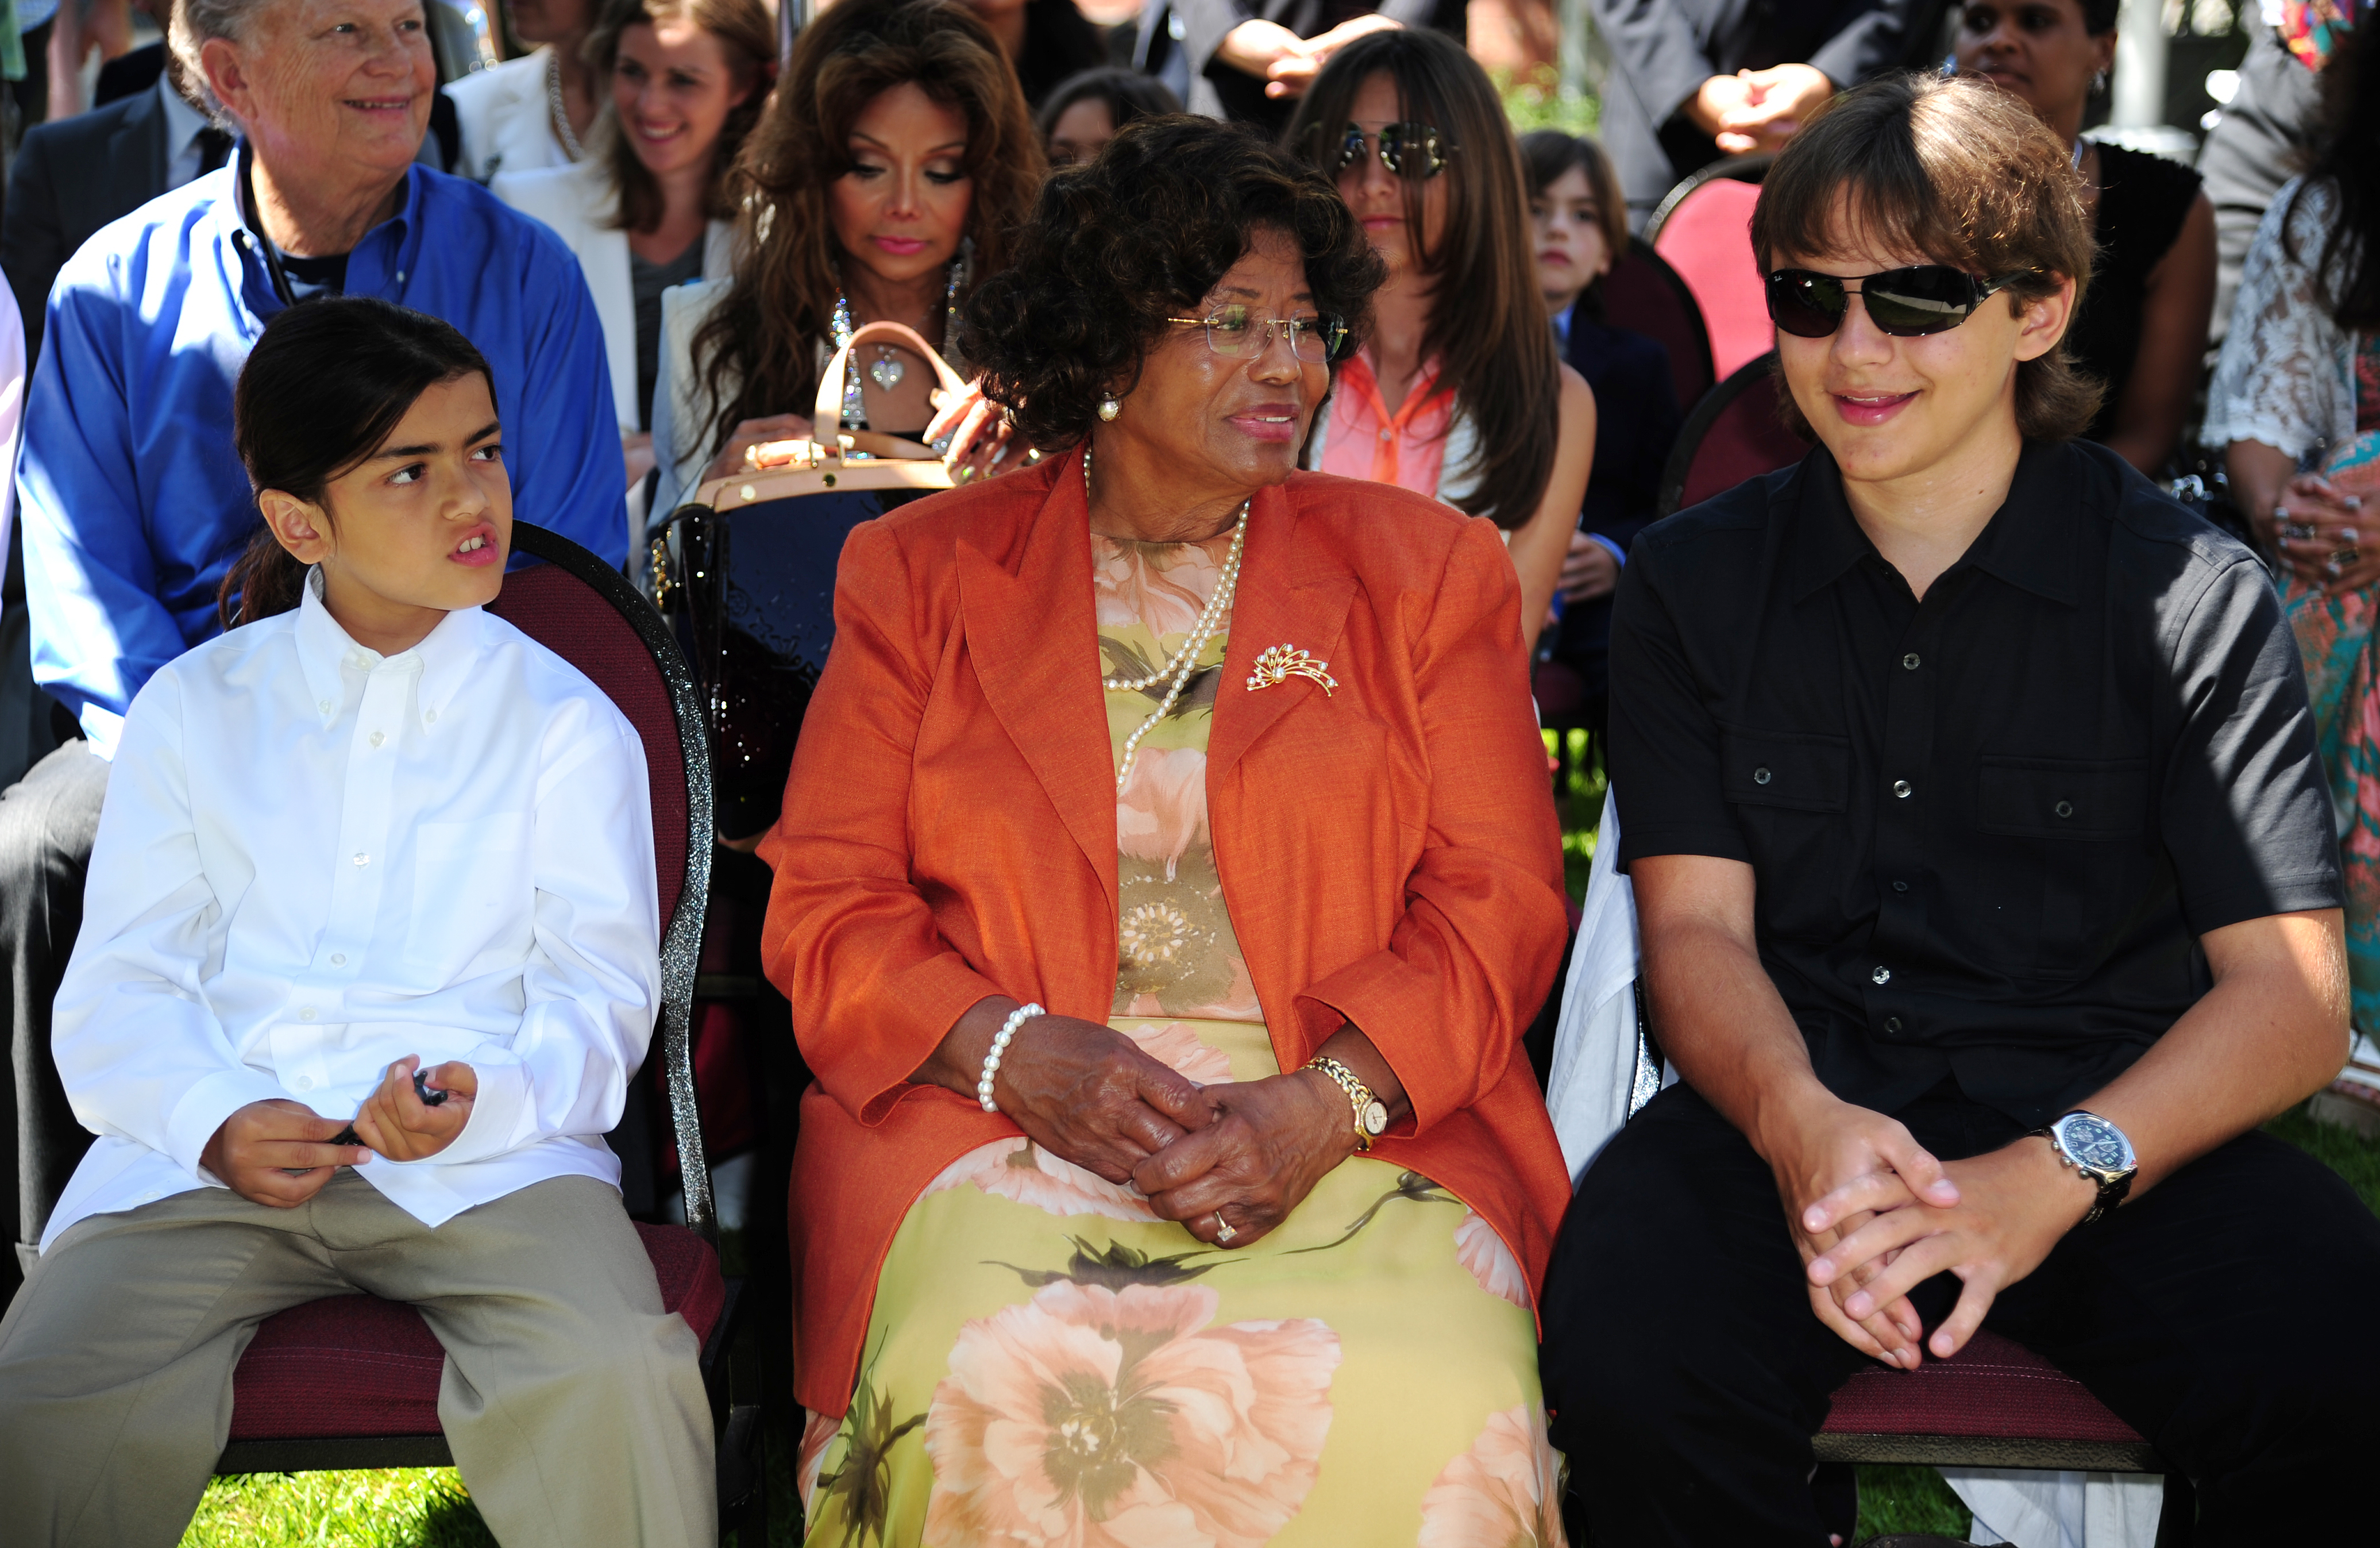 Bigi, Katherine, and Prince Jackson at a ceremony honoring Michael Jackson at Children's Hospital in Los Angeles, California on August 8, 2011. | Source: Getty Images